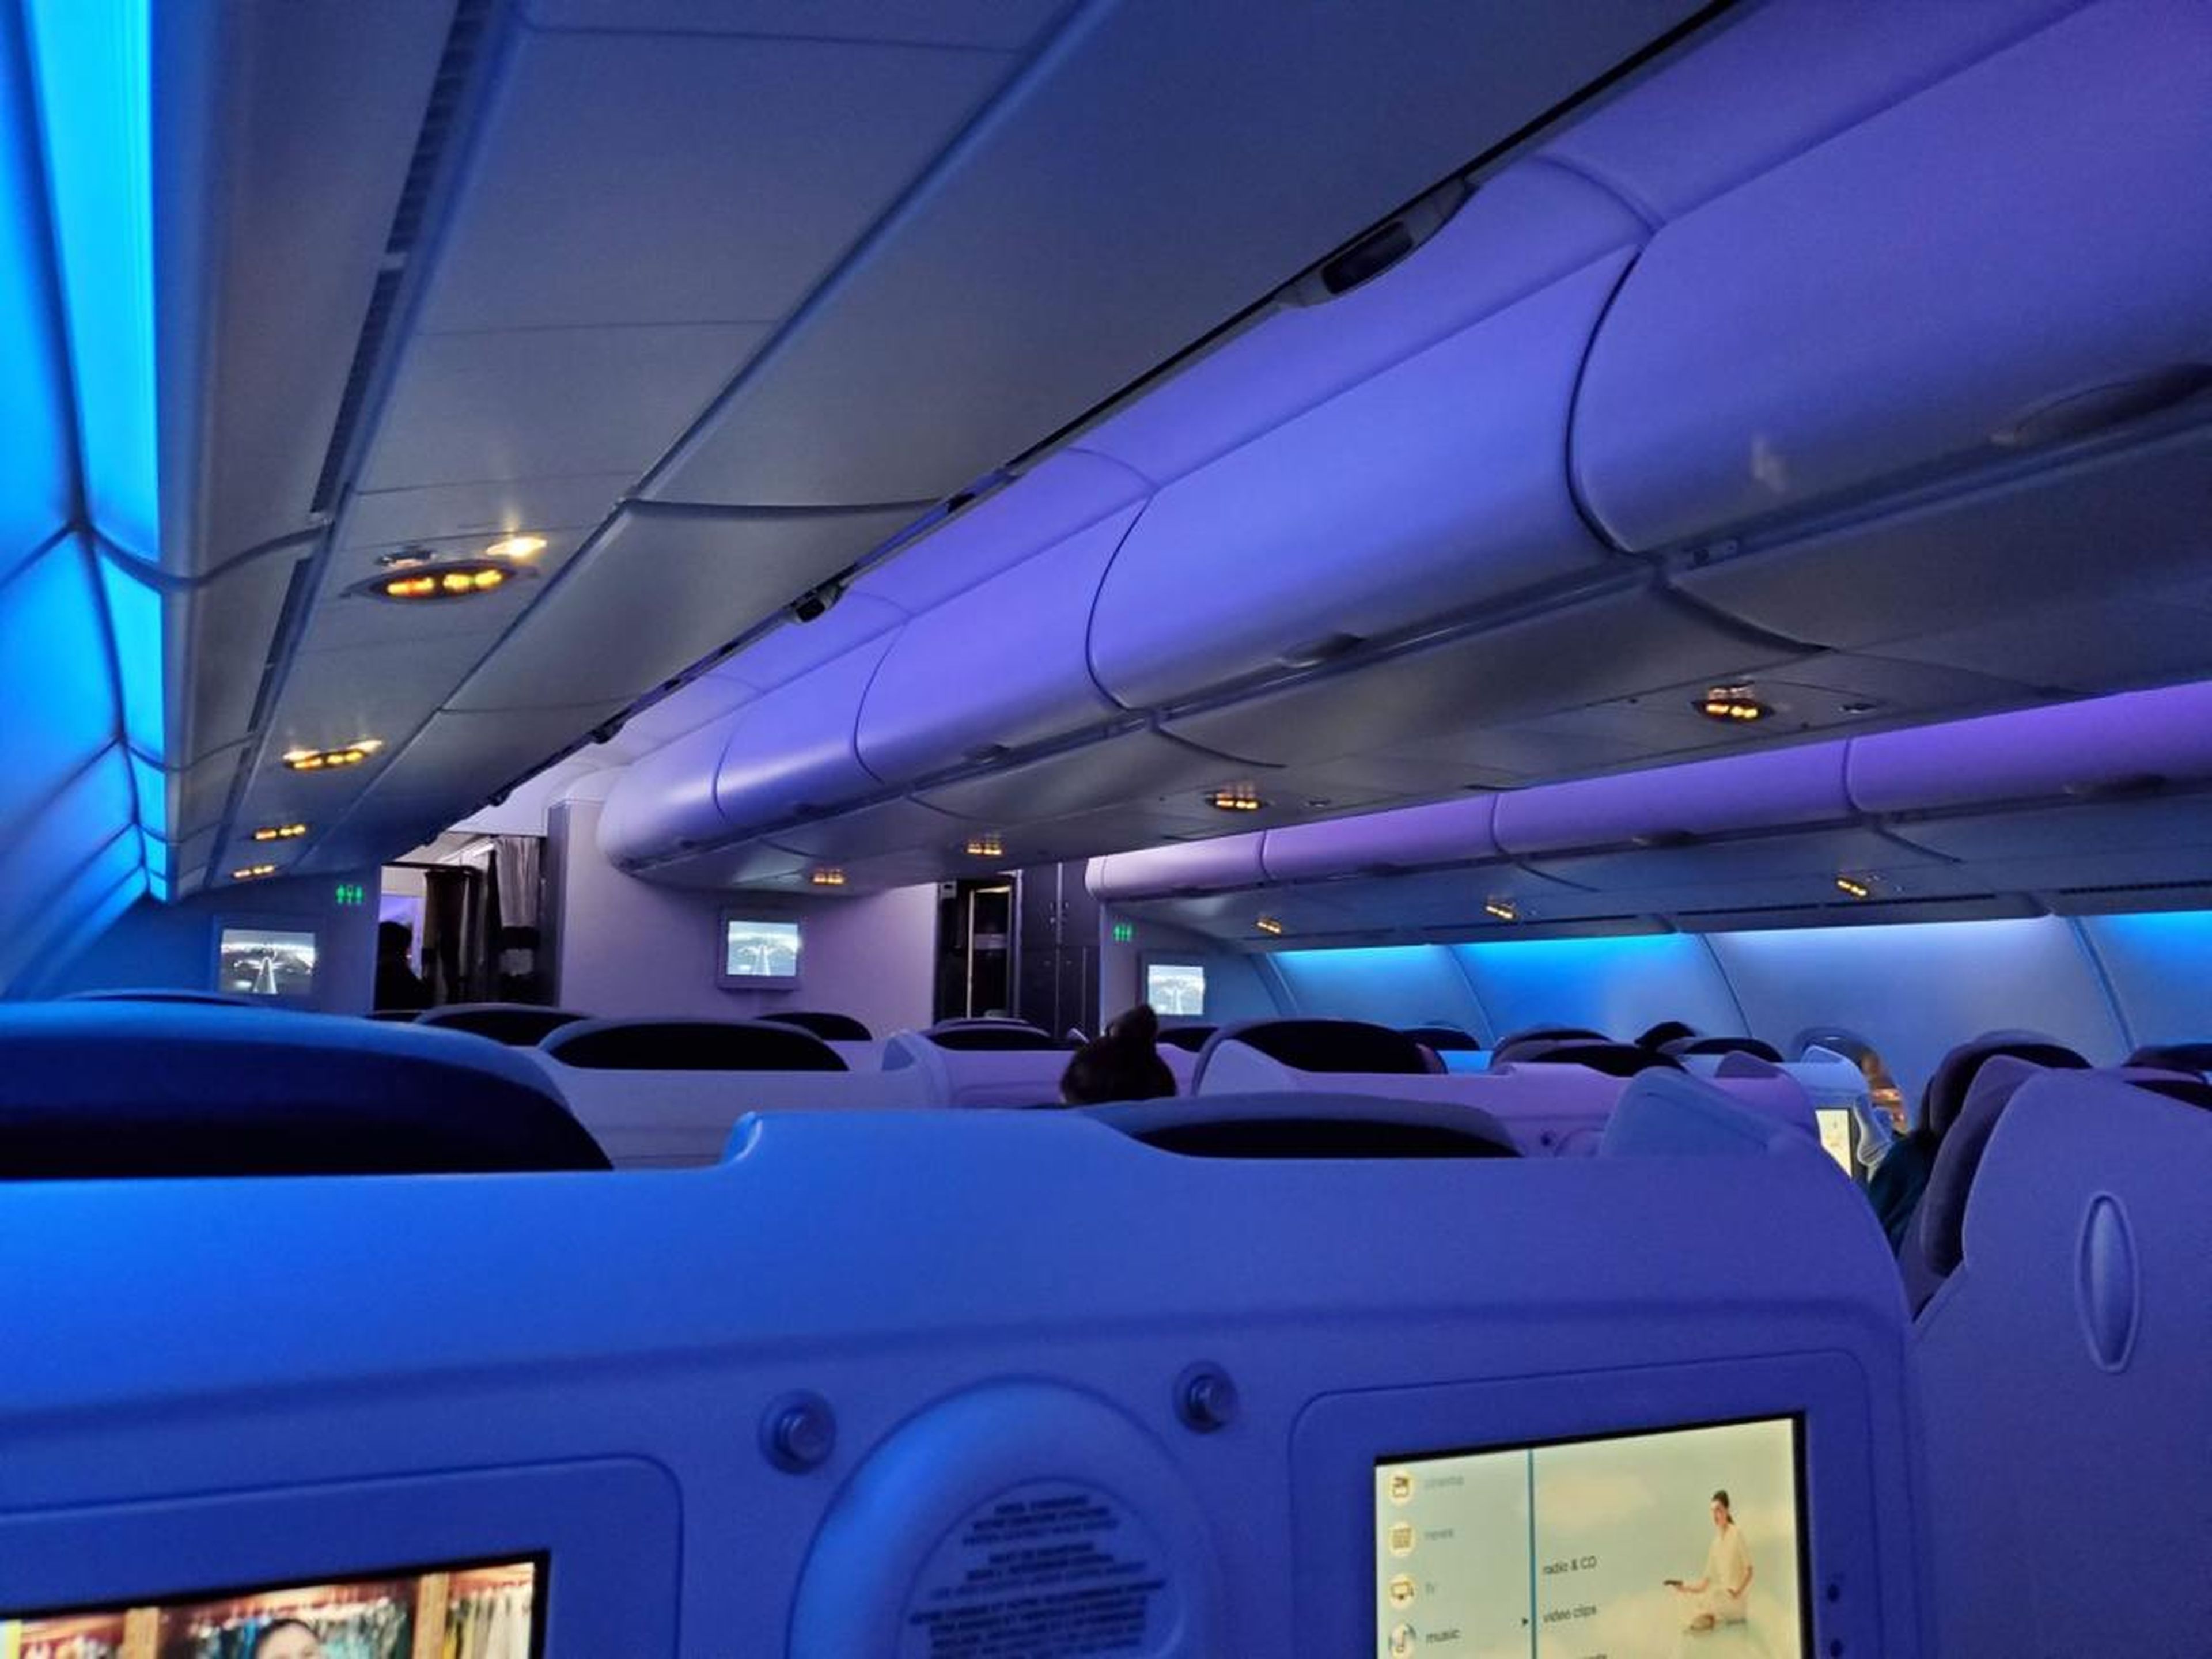 Mood lighting, which changed throughout the flight, had a calming effect. While the lights were mostly out during the night, I still could get only a few hours of interrupted sleep with all the turbulence. But it's true what they